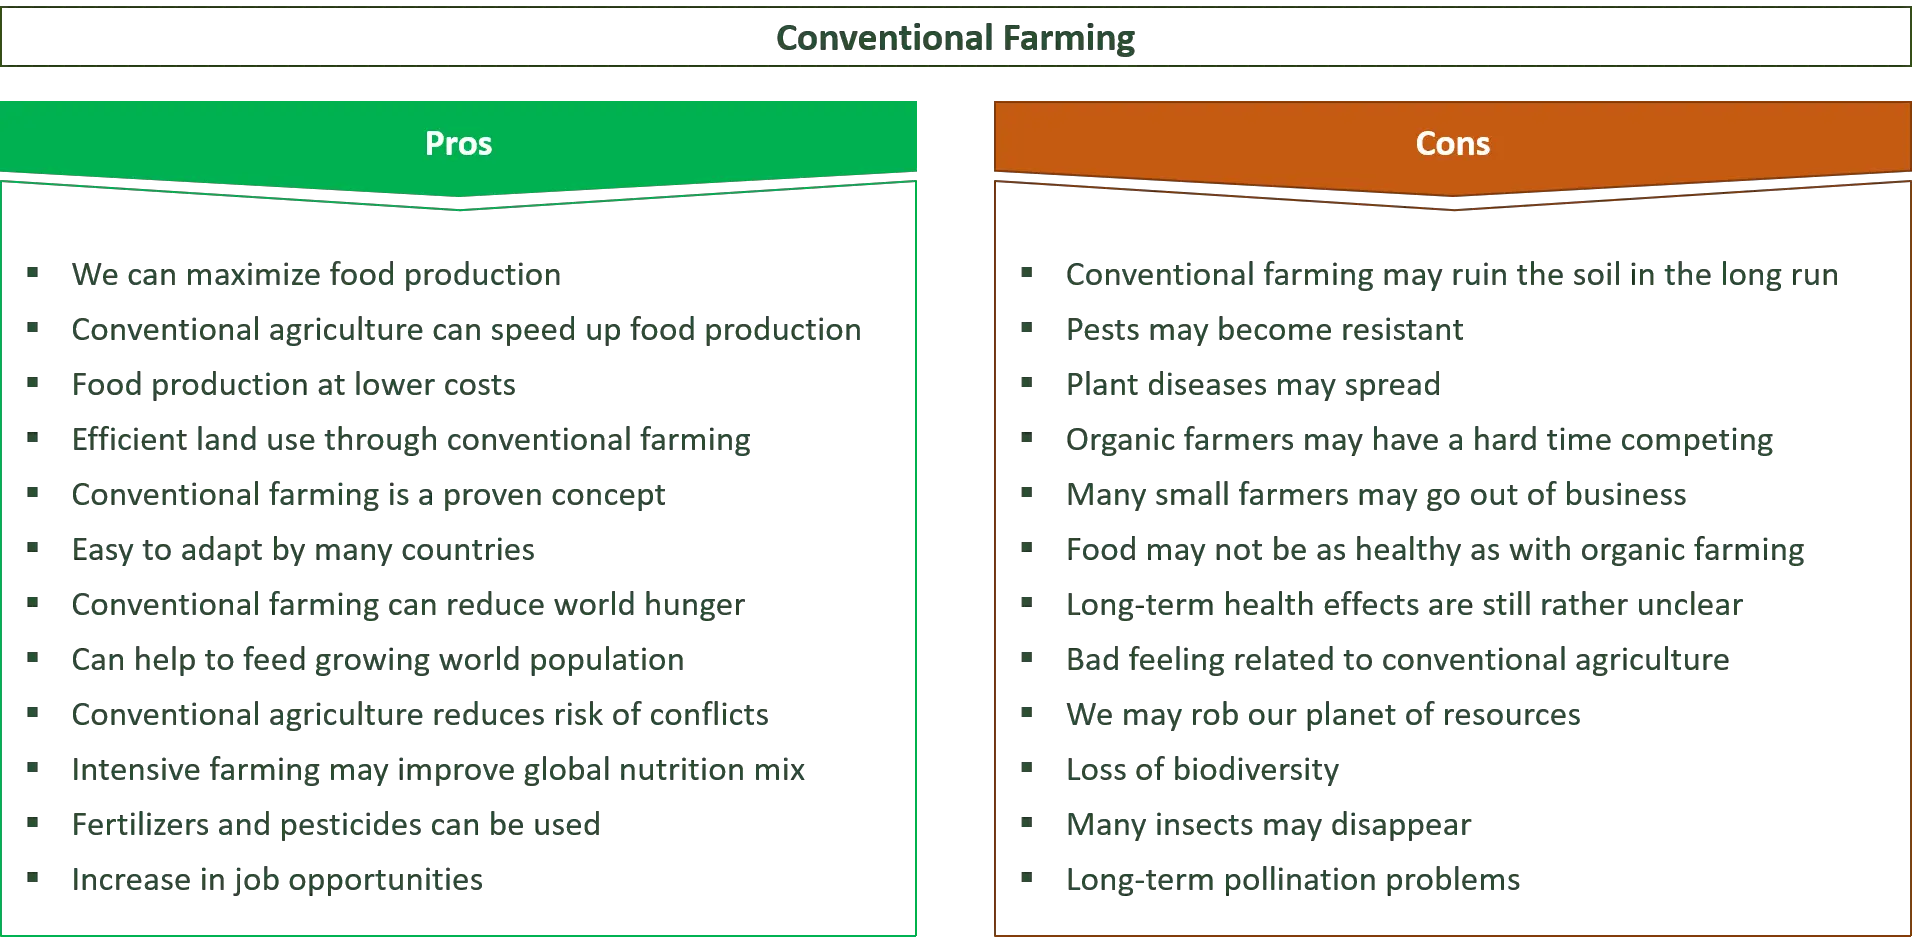 What is better: conventional or organic farming - sort out the pros and cons!